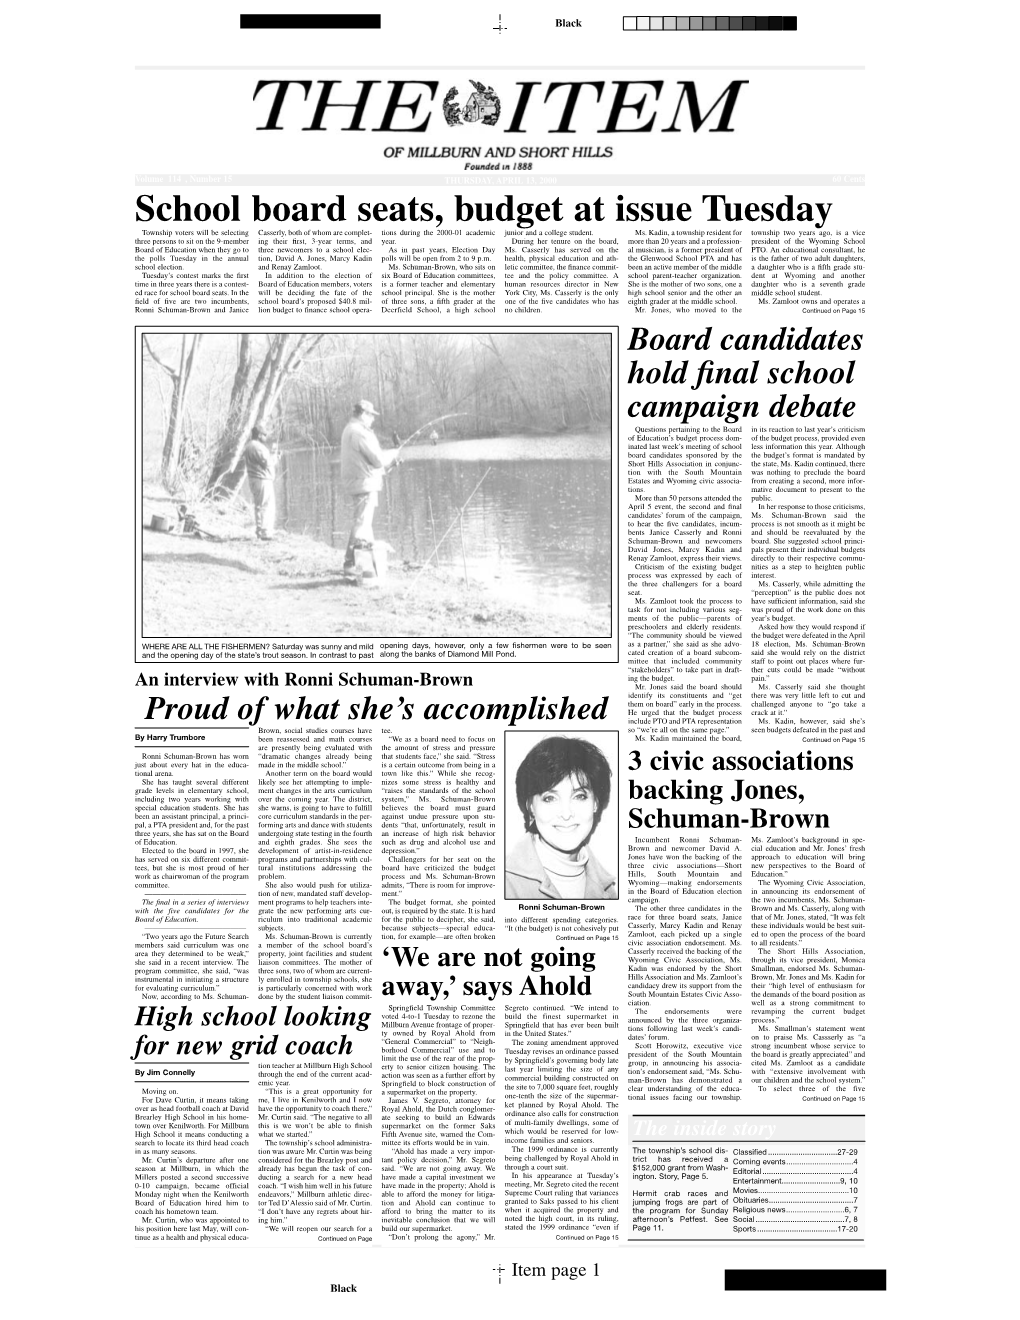 School Board Seats, Budget at Issue Tuesday